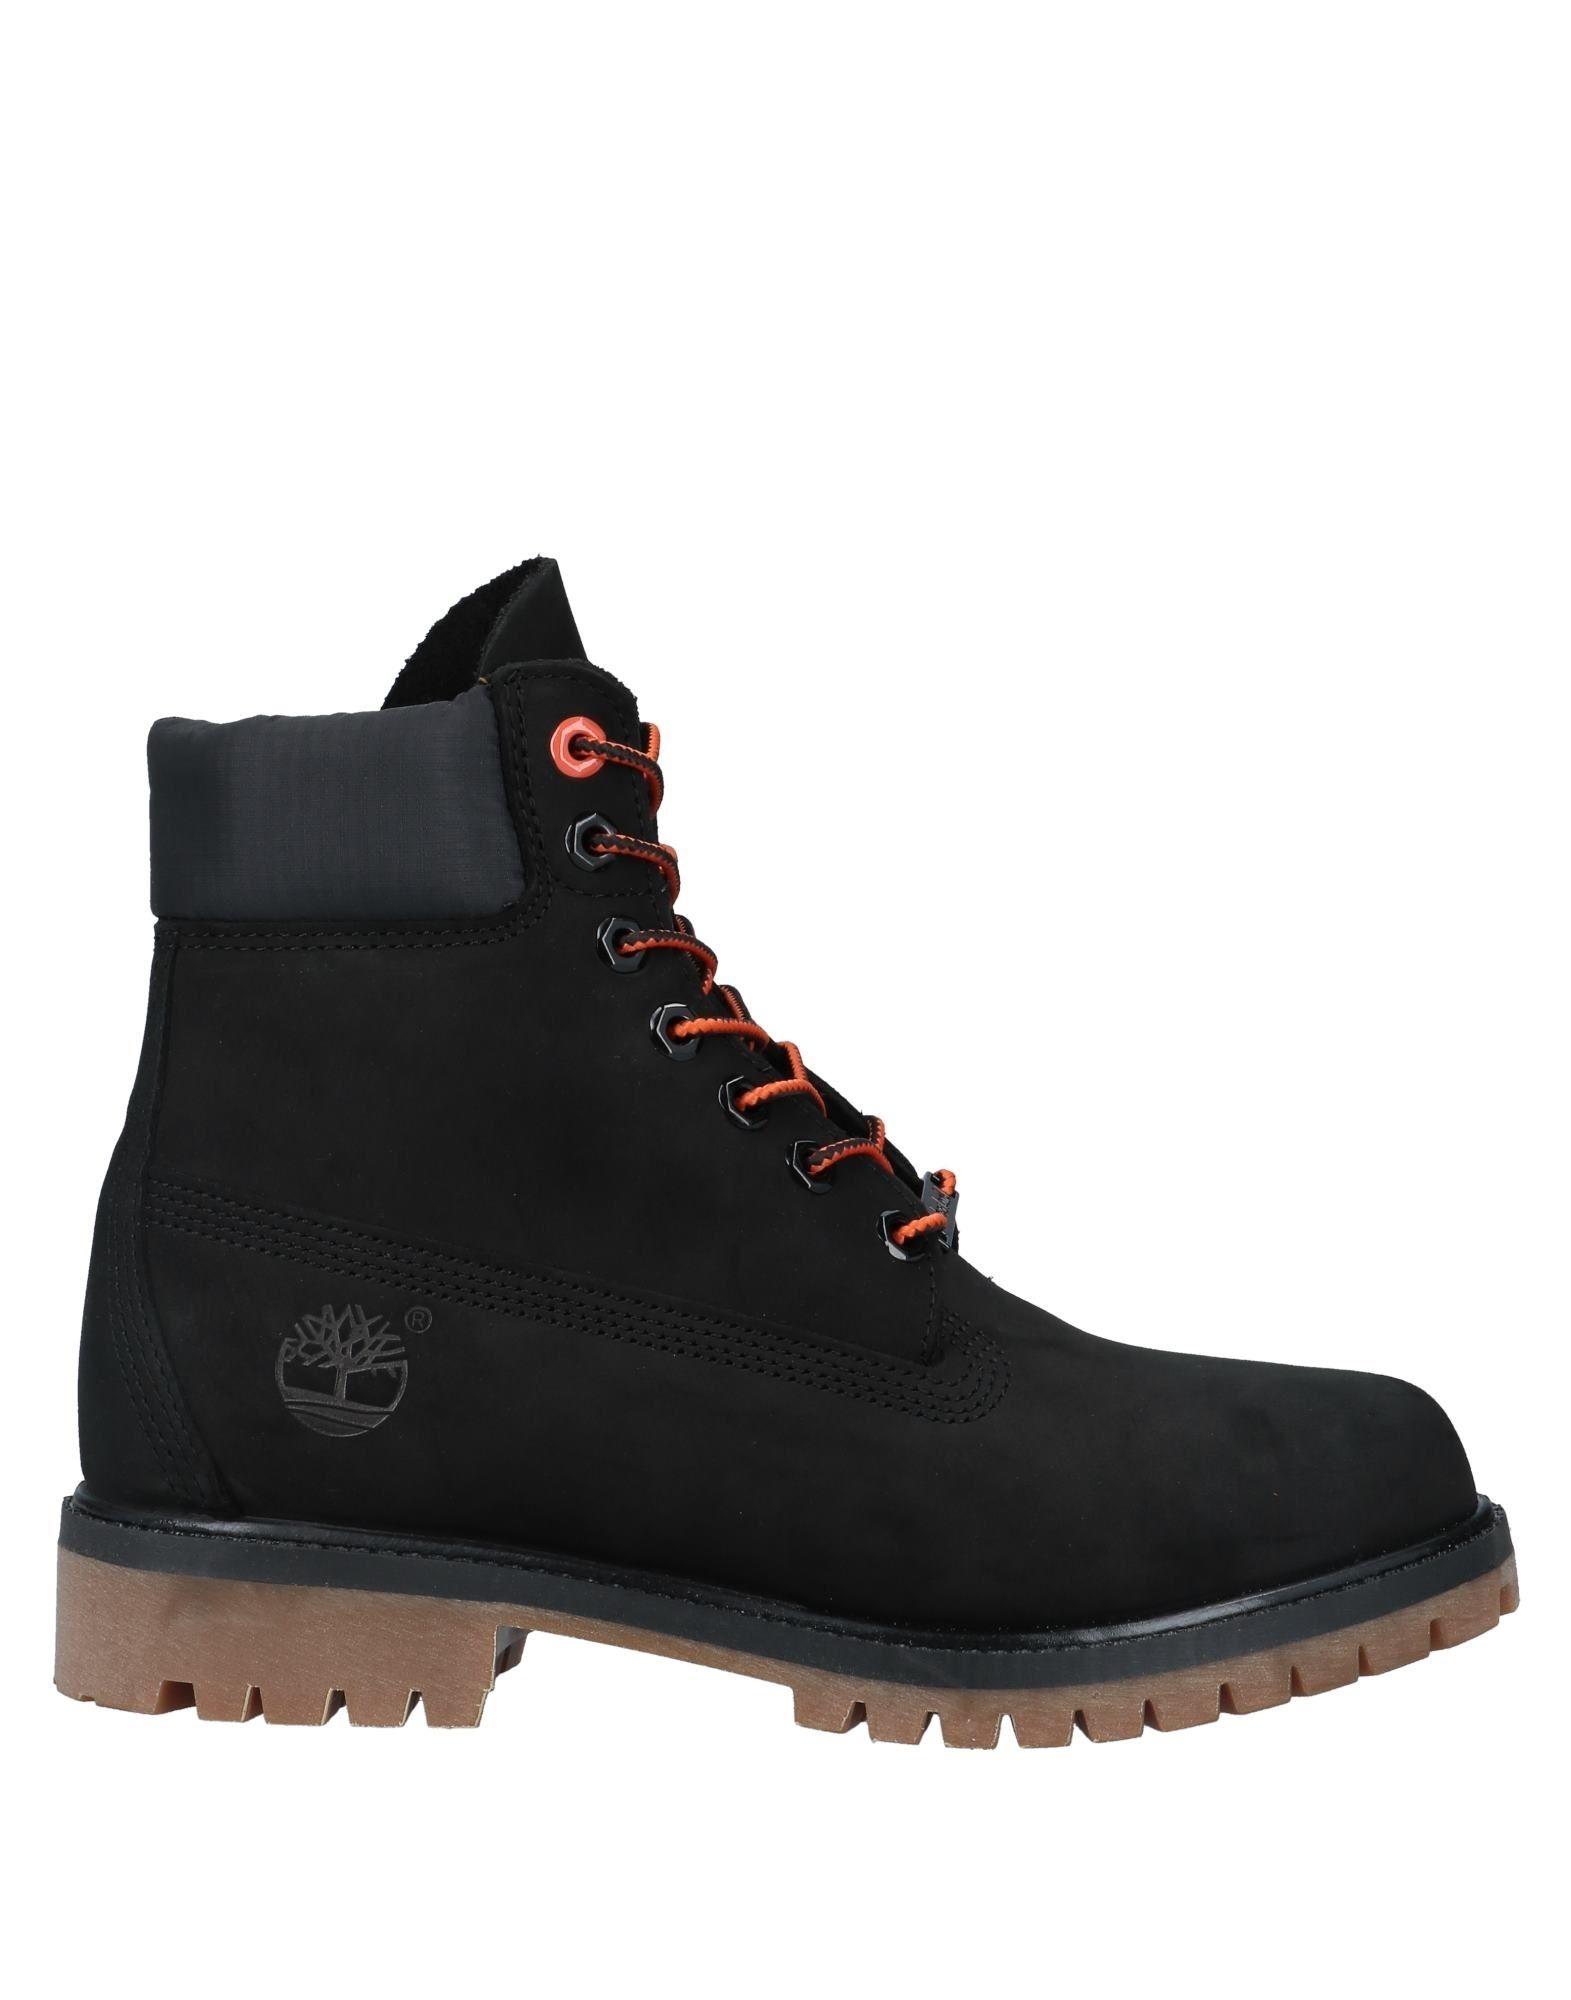 Timberland Ankle Boots in Black for Men - Lyst